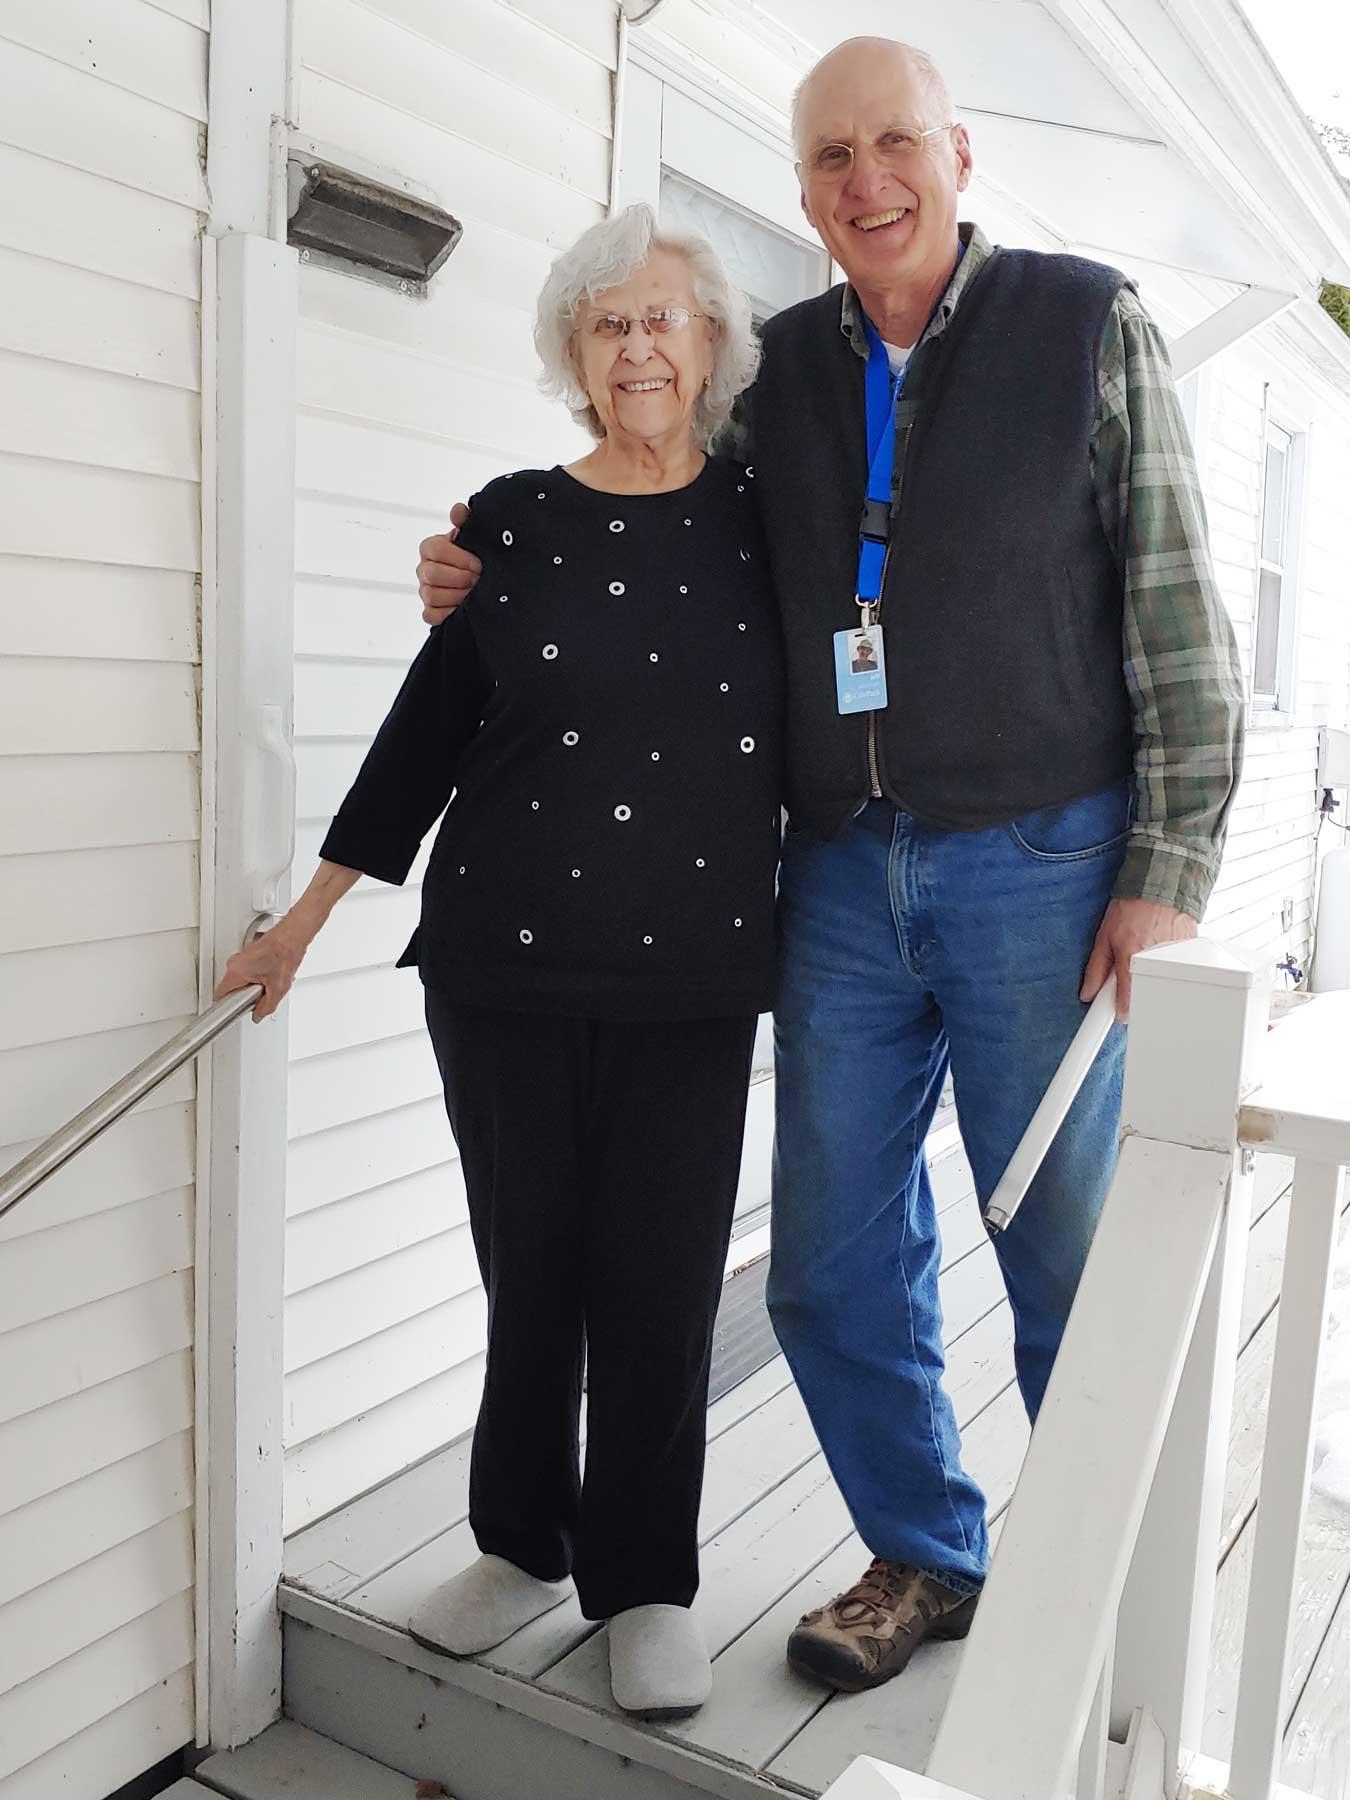 Jeff Blomstedt (right) with Home Safety consumer Doris B. (left).